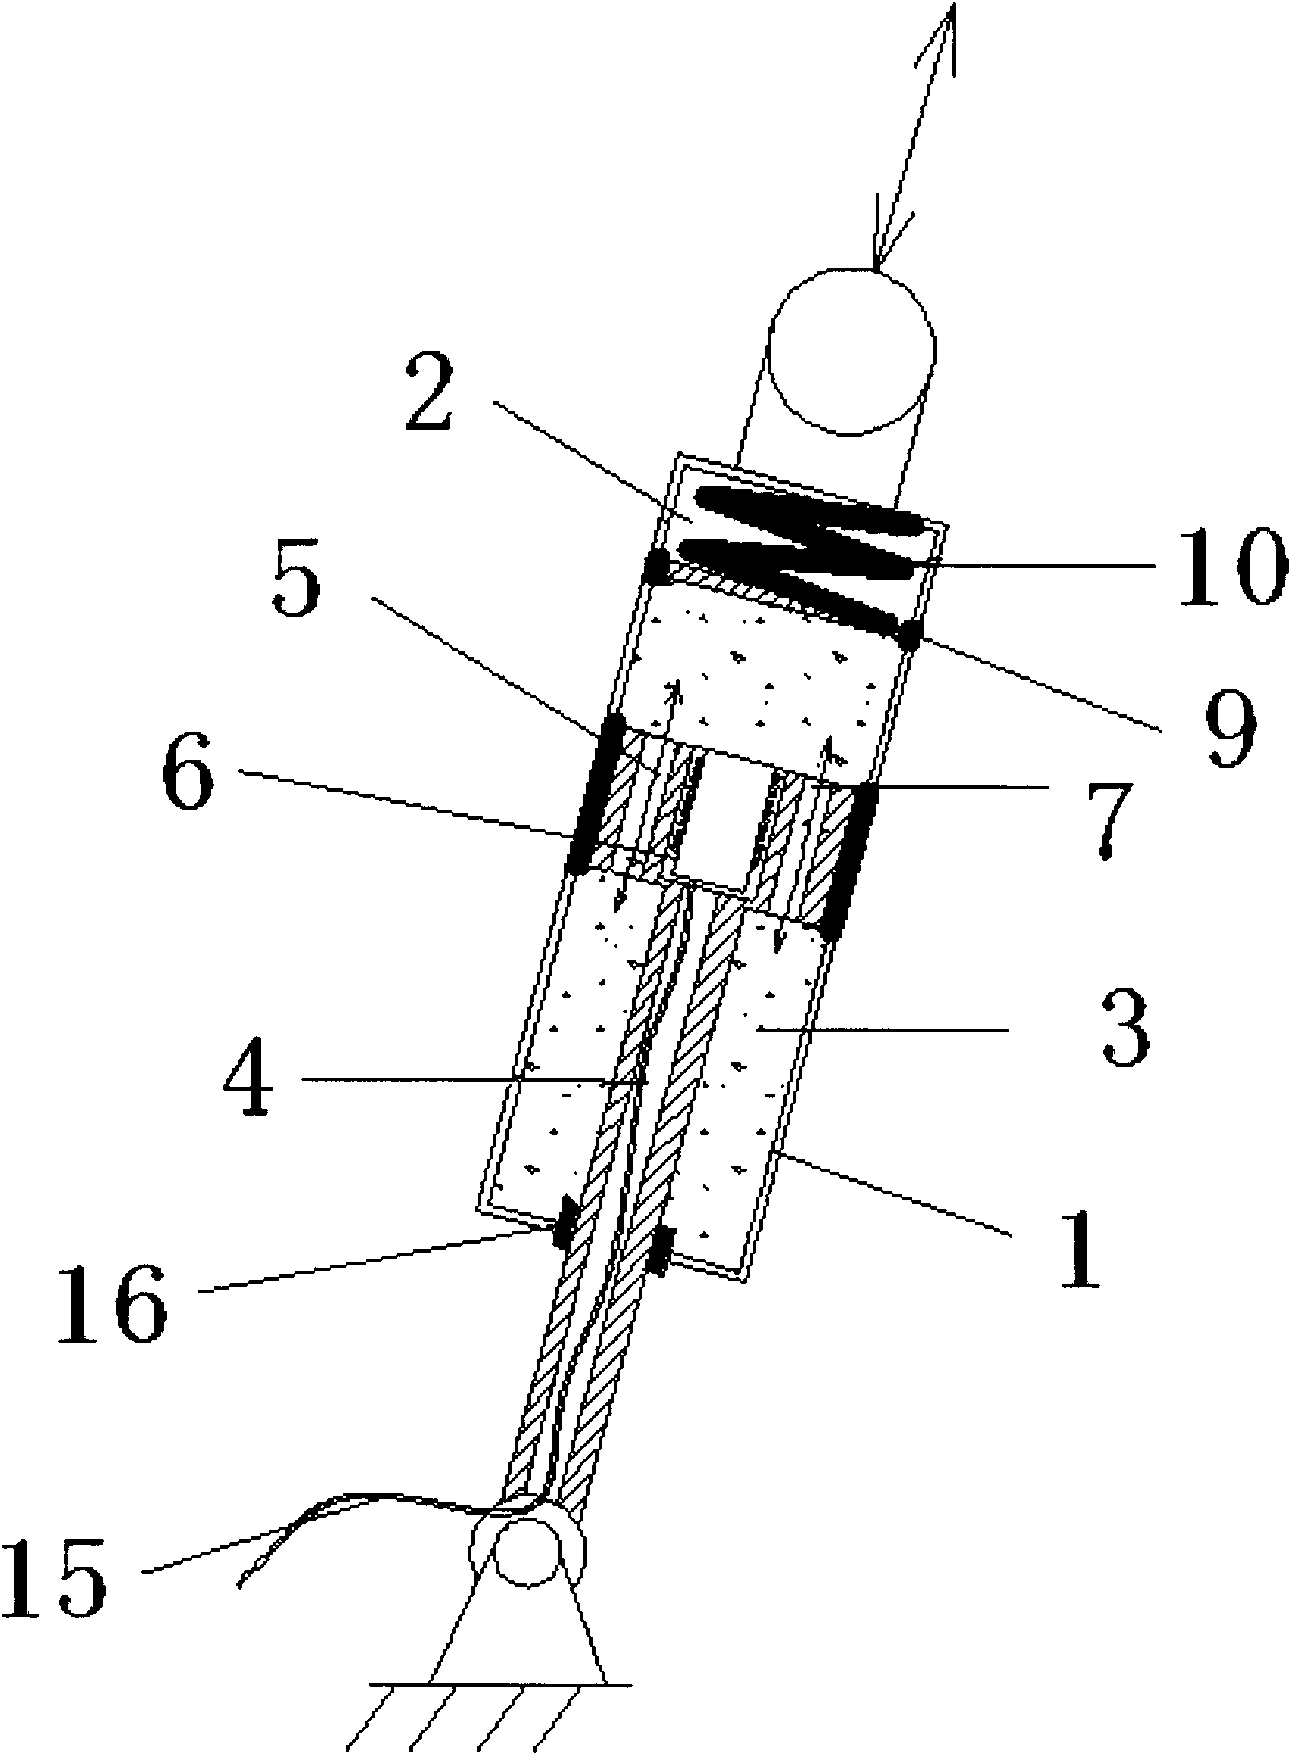 Variable damping shock absorber and drum washing machine using shock absorber